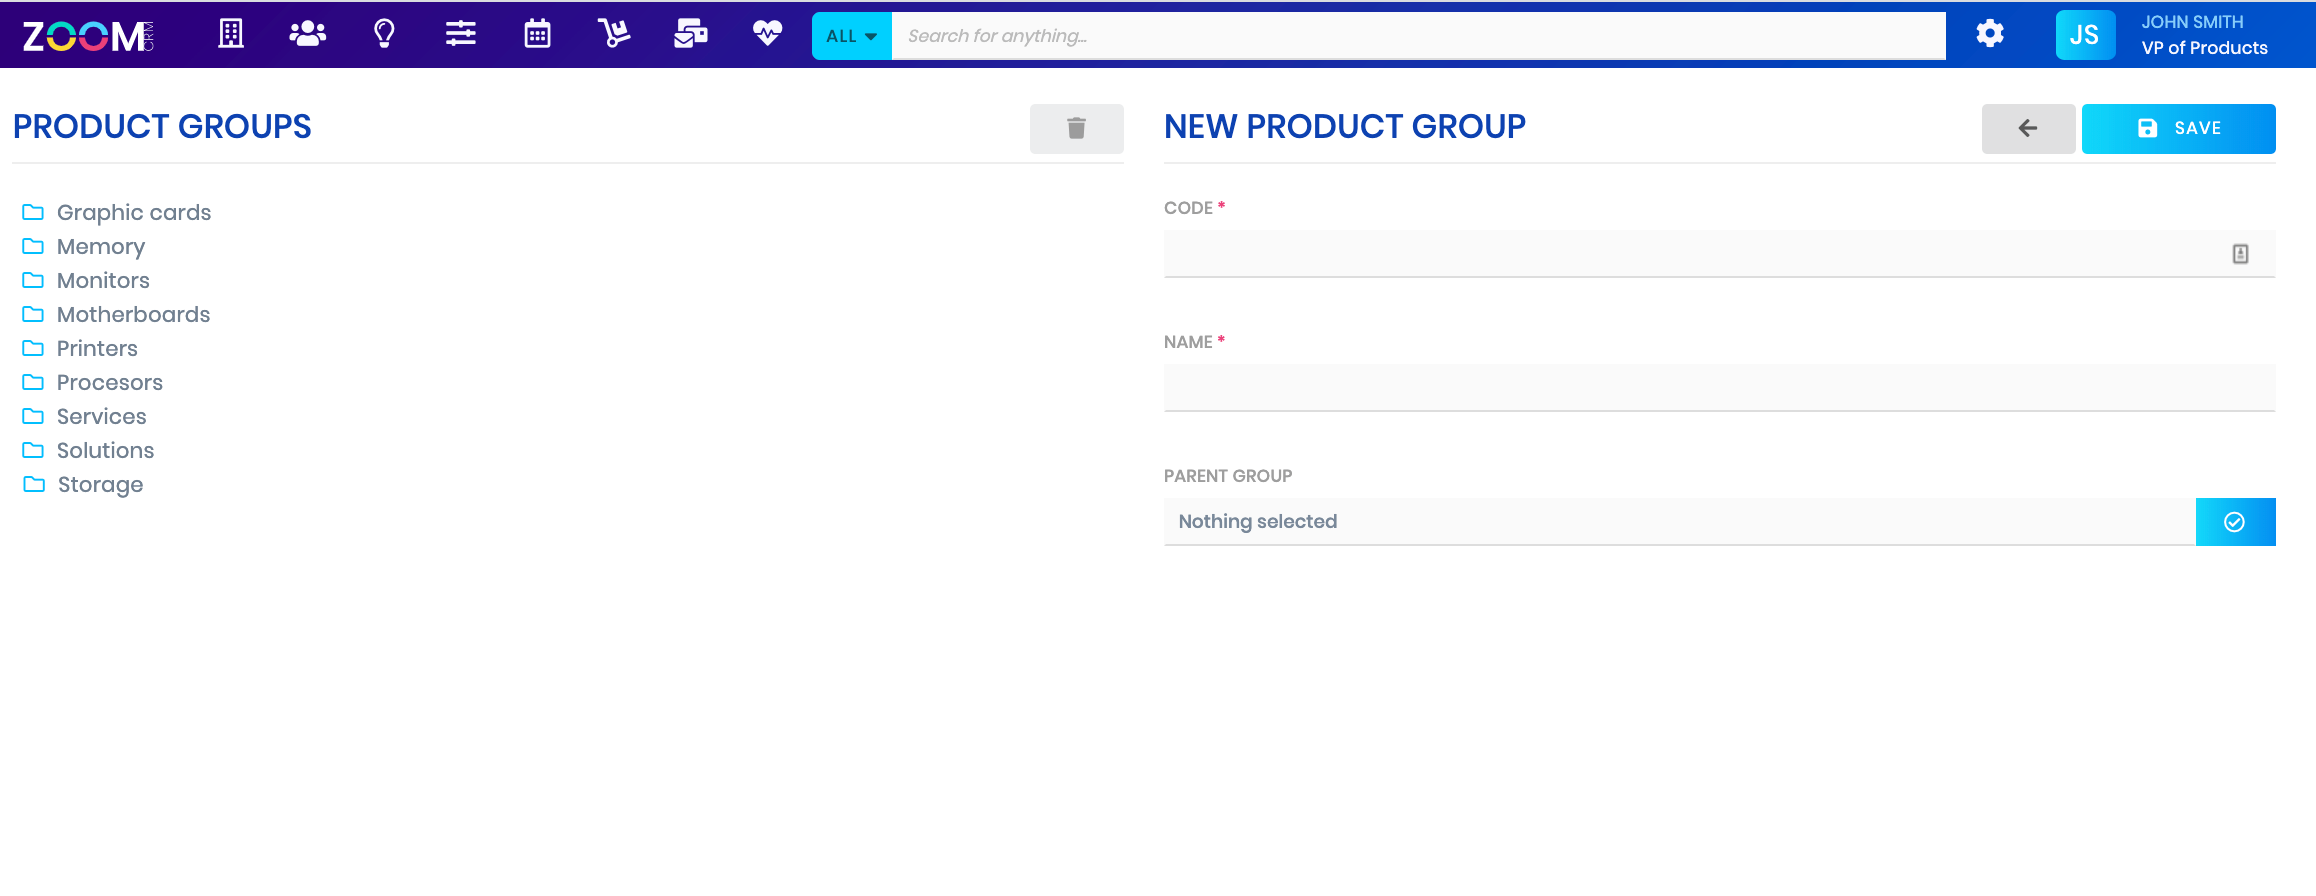 Product groups